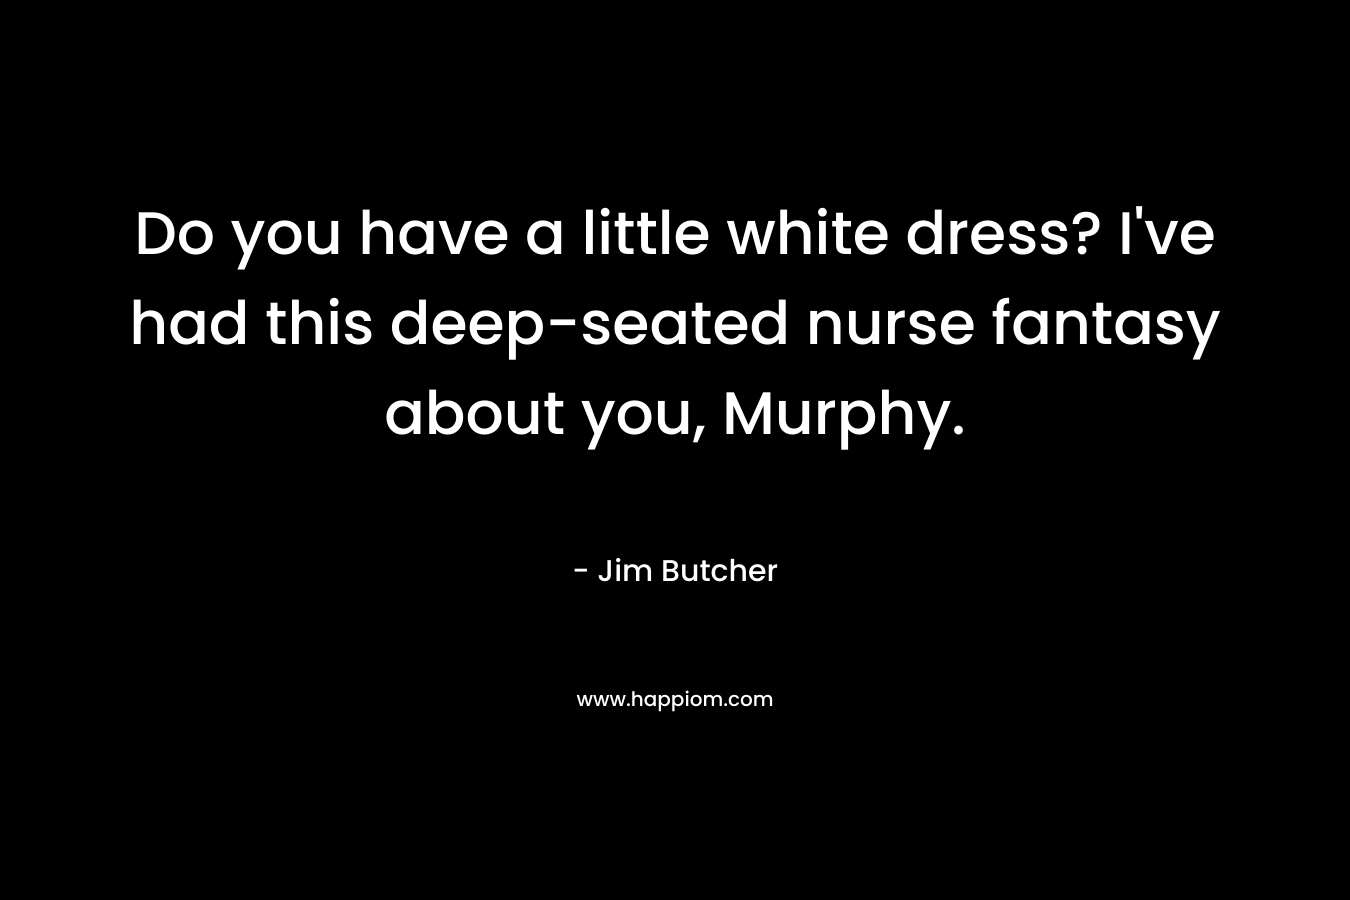 Do you have a little white dress? I've had this deep-seated nurse fantasy about you, Murphy.